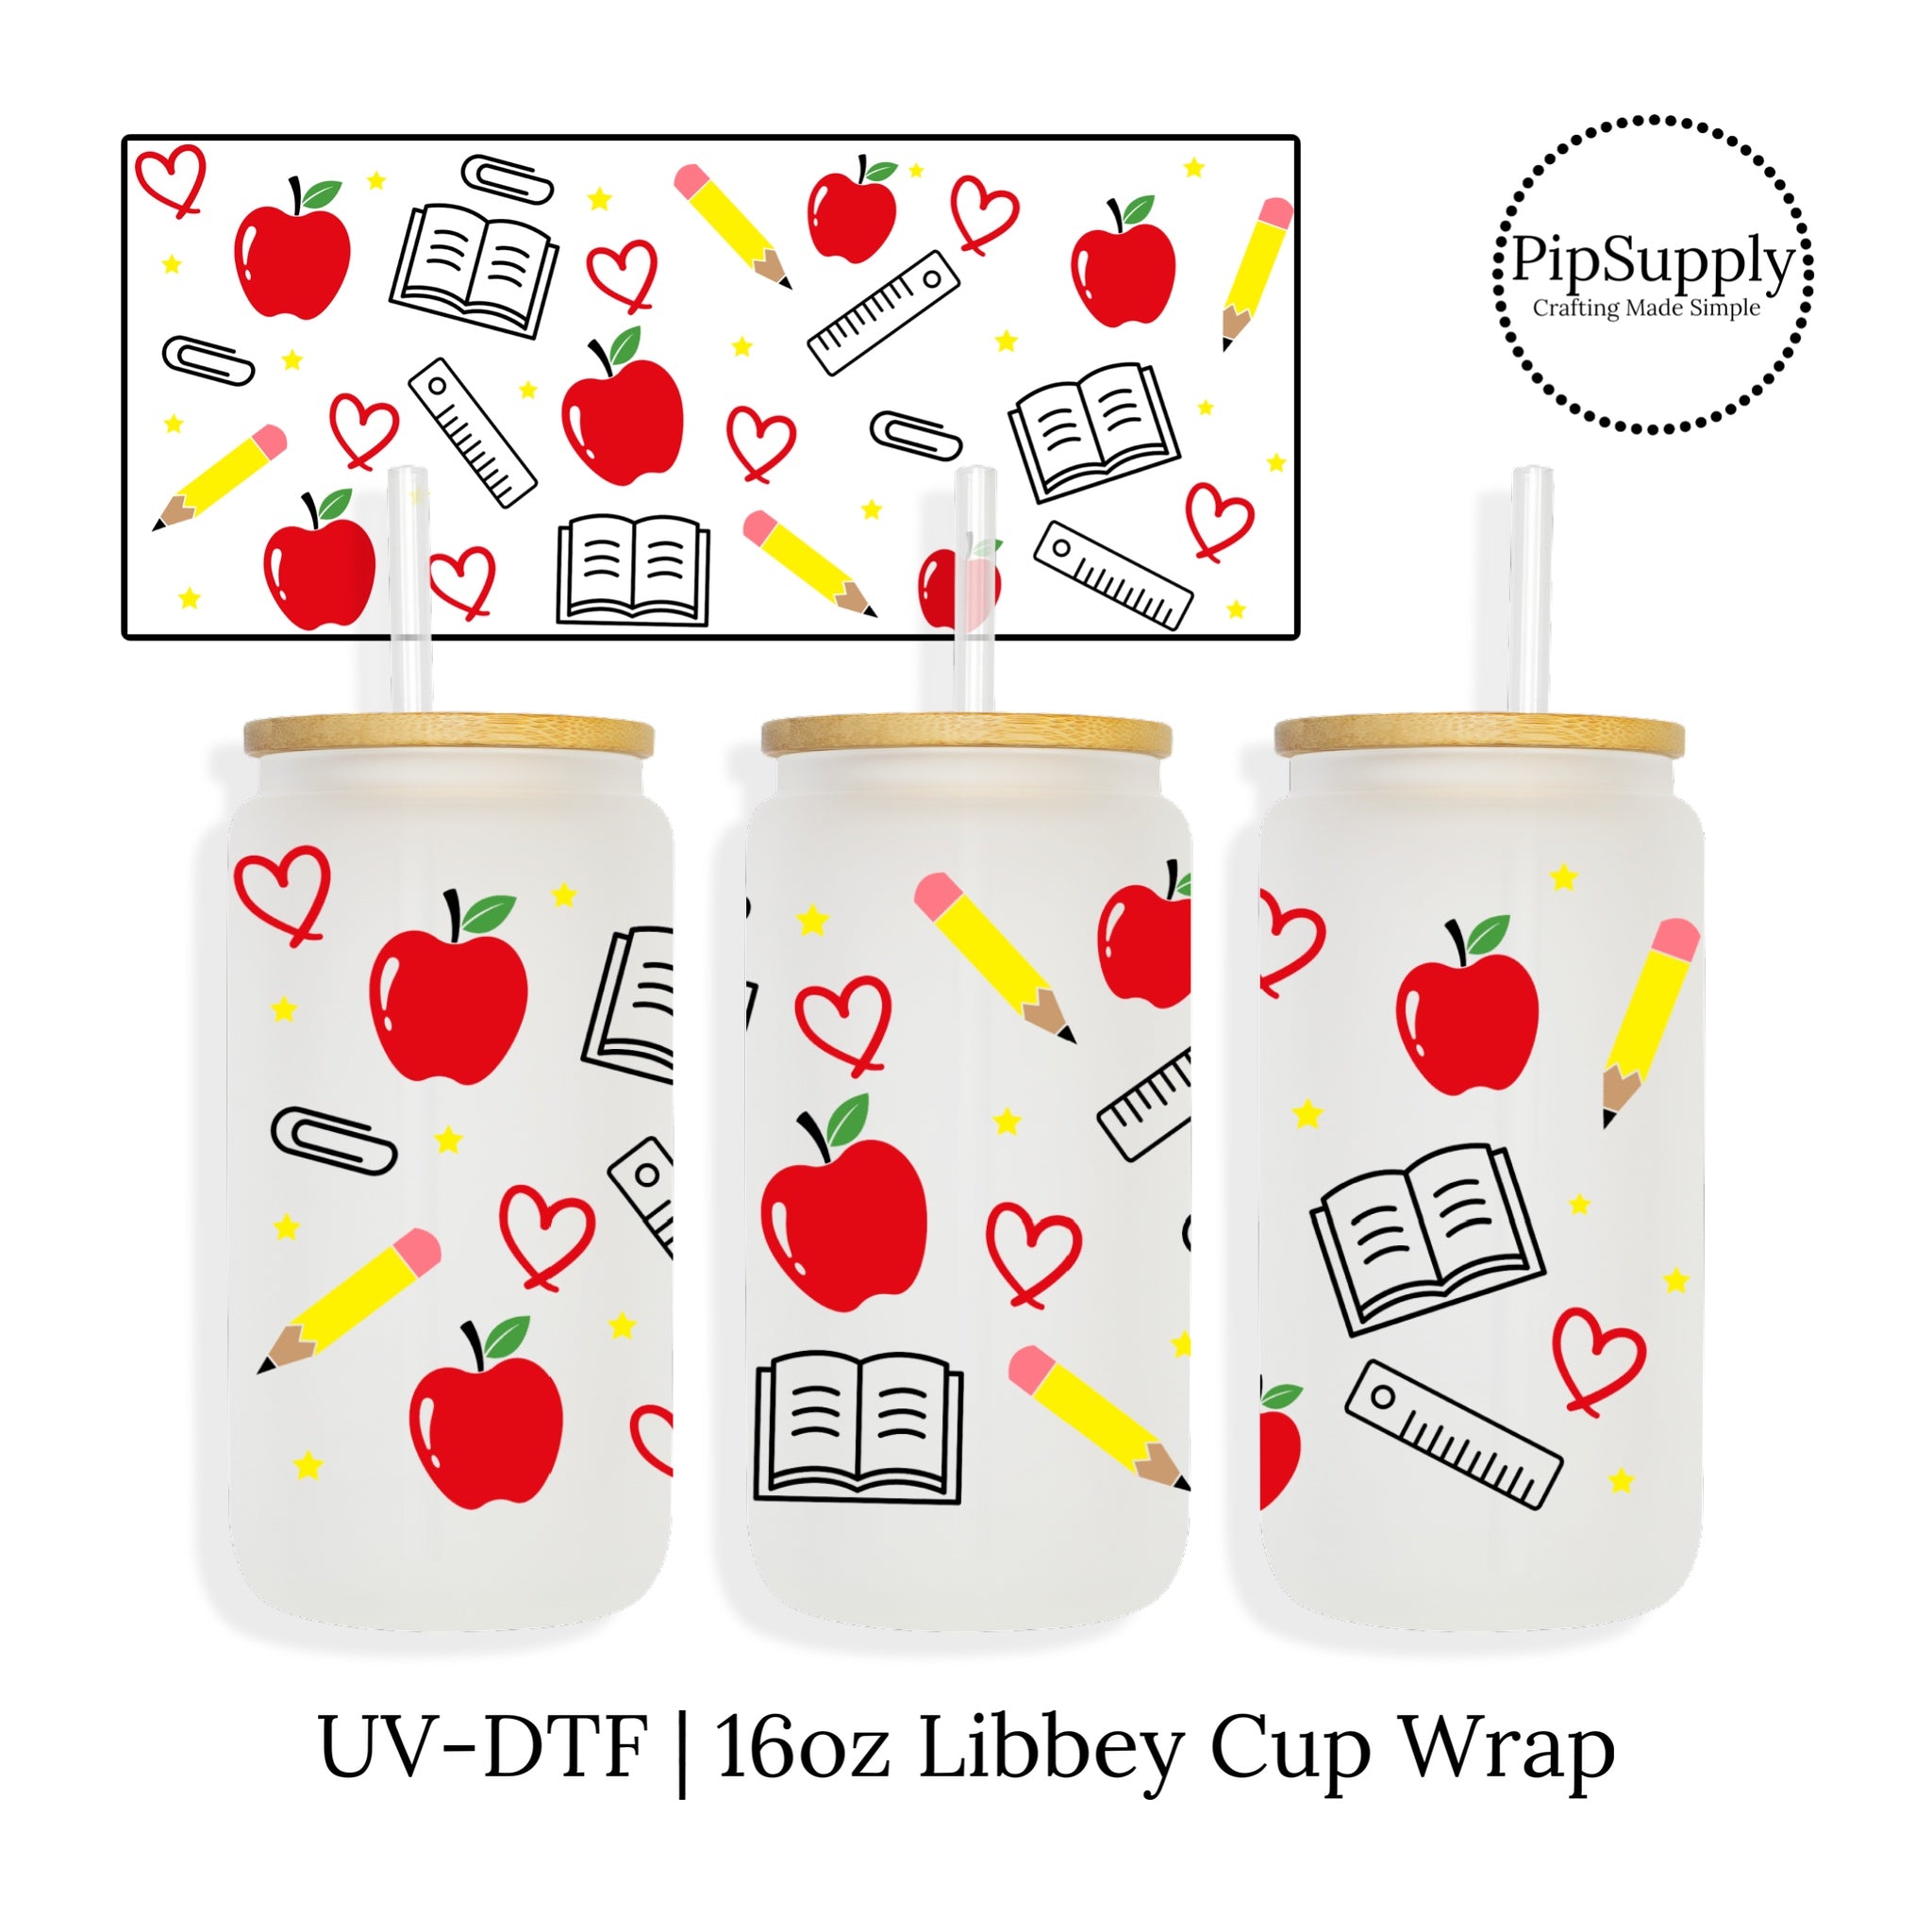  Uvdtf Cup Wraps Stickers，9sheets Leopard Mama Theme for Uv Dtf  Cup Wrap Uvdtf Cup Wraps Uv Dtf Transfer Sticker Uv Transfer Stickers for  Cups Uv Transfer Stickers Uv Dtf Wraps Sticker